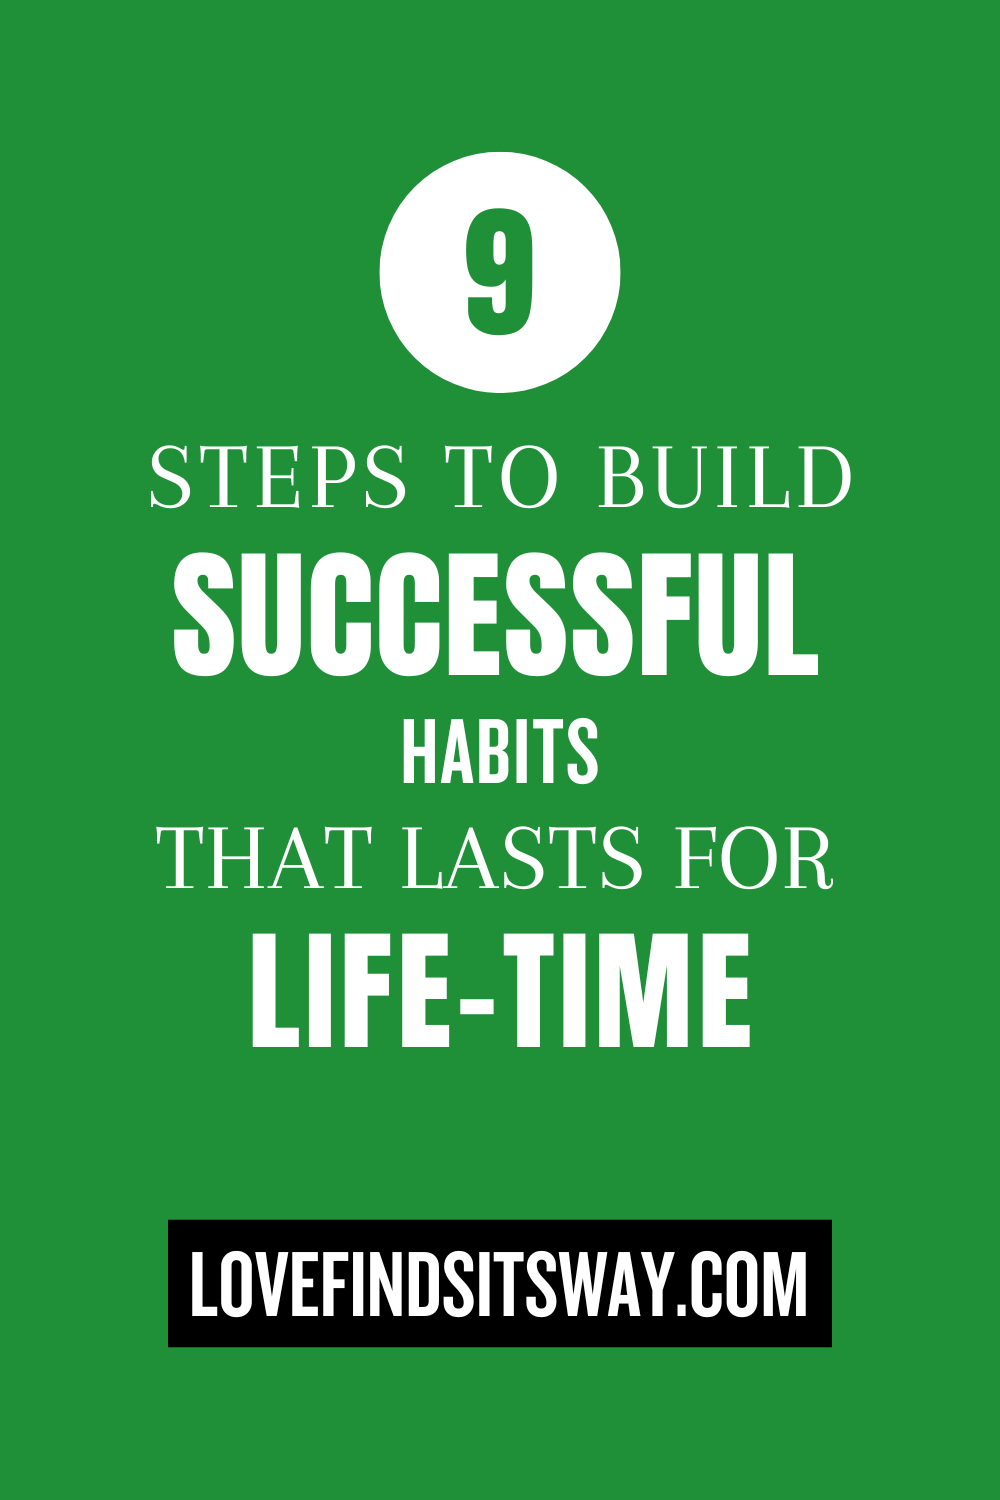 9-Steps-To-Build-Successful-Habits-That-Lasts-For-Life-Time